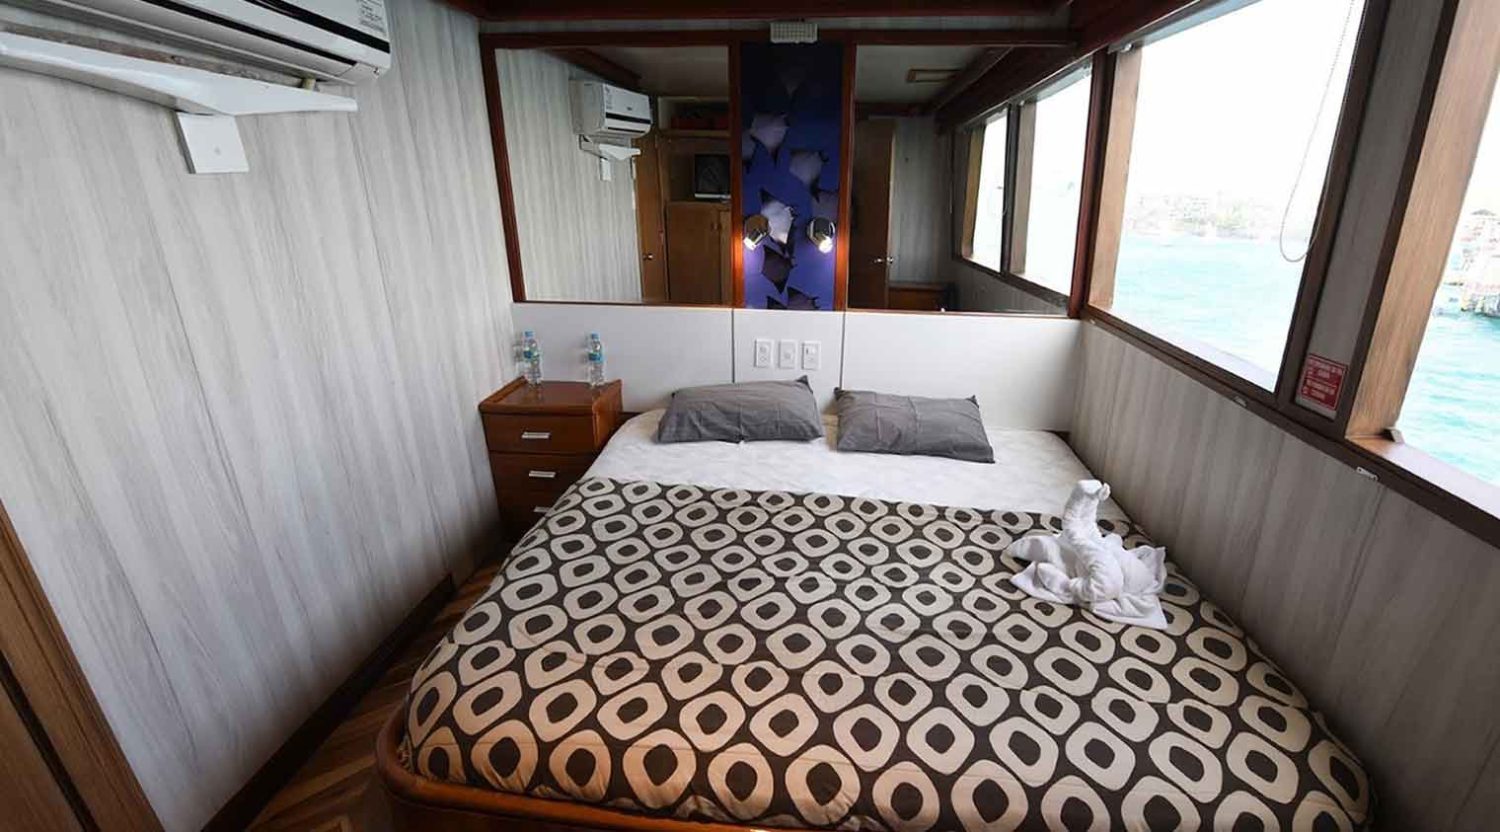 king size bed bedroom of humboldt explorer yacht of galapagos islands